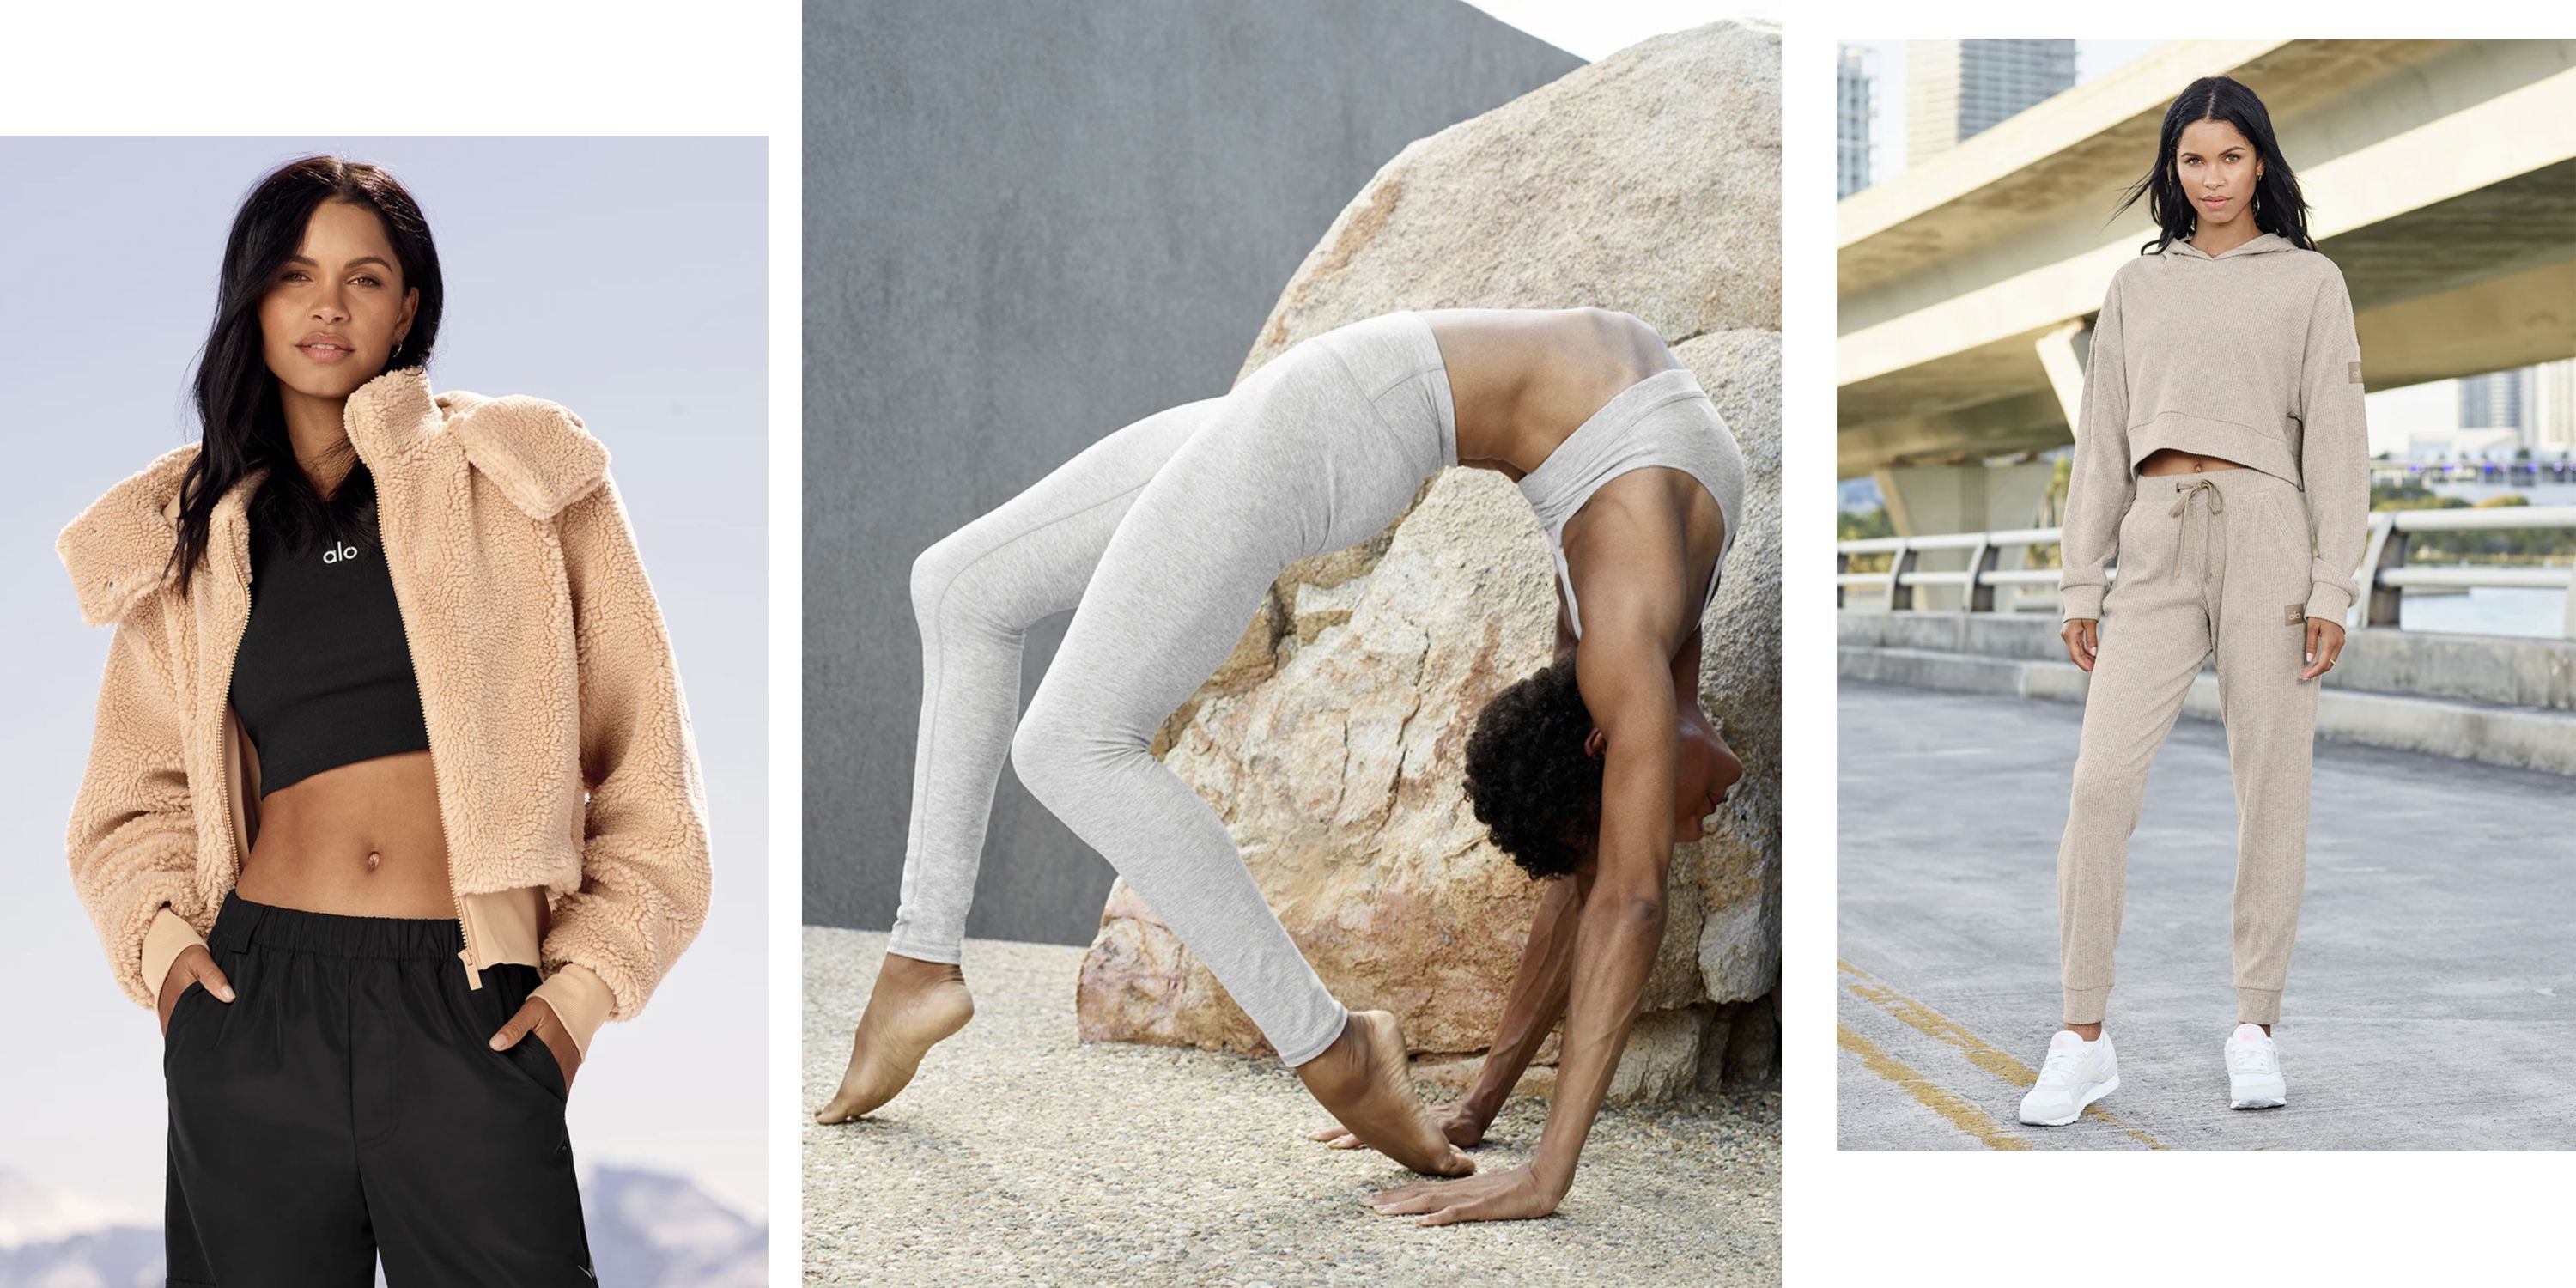 Alo Yoga’s Coolest Activewear Is Marked Down for Black Friday